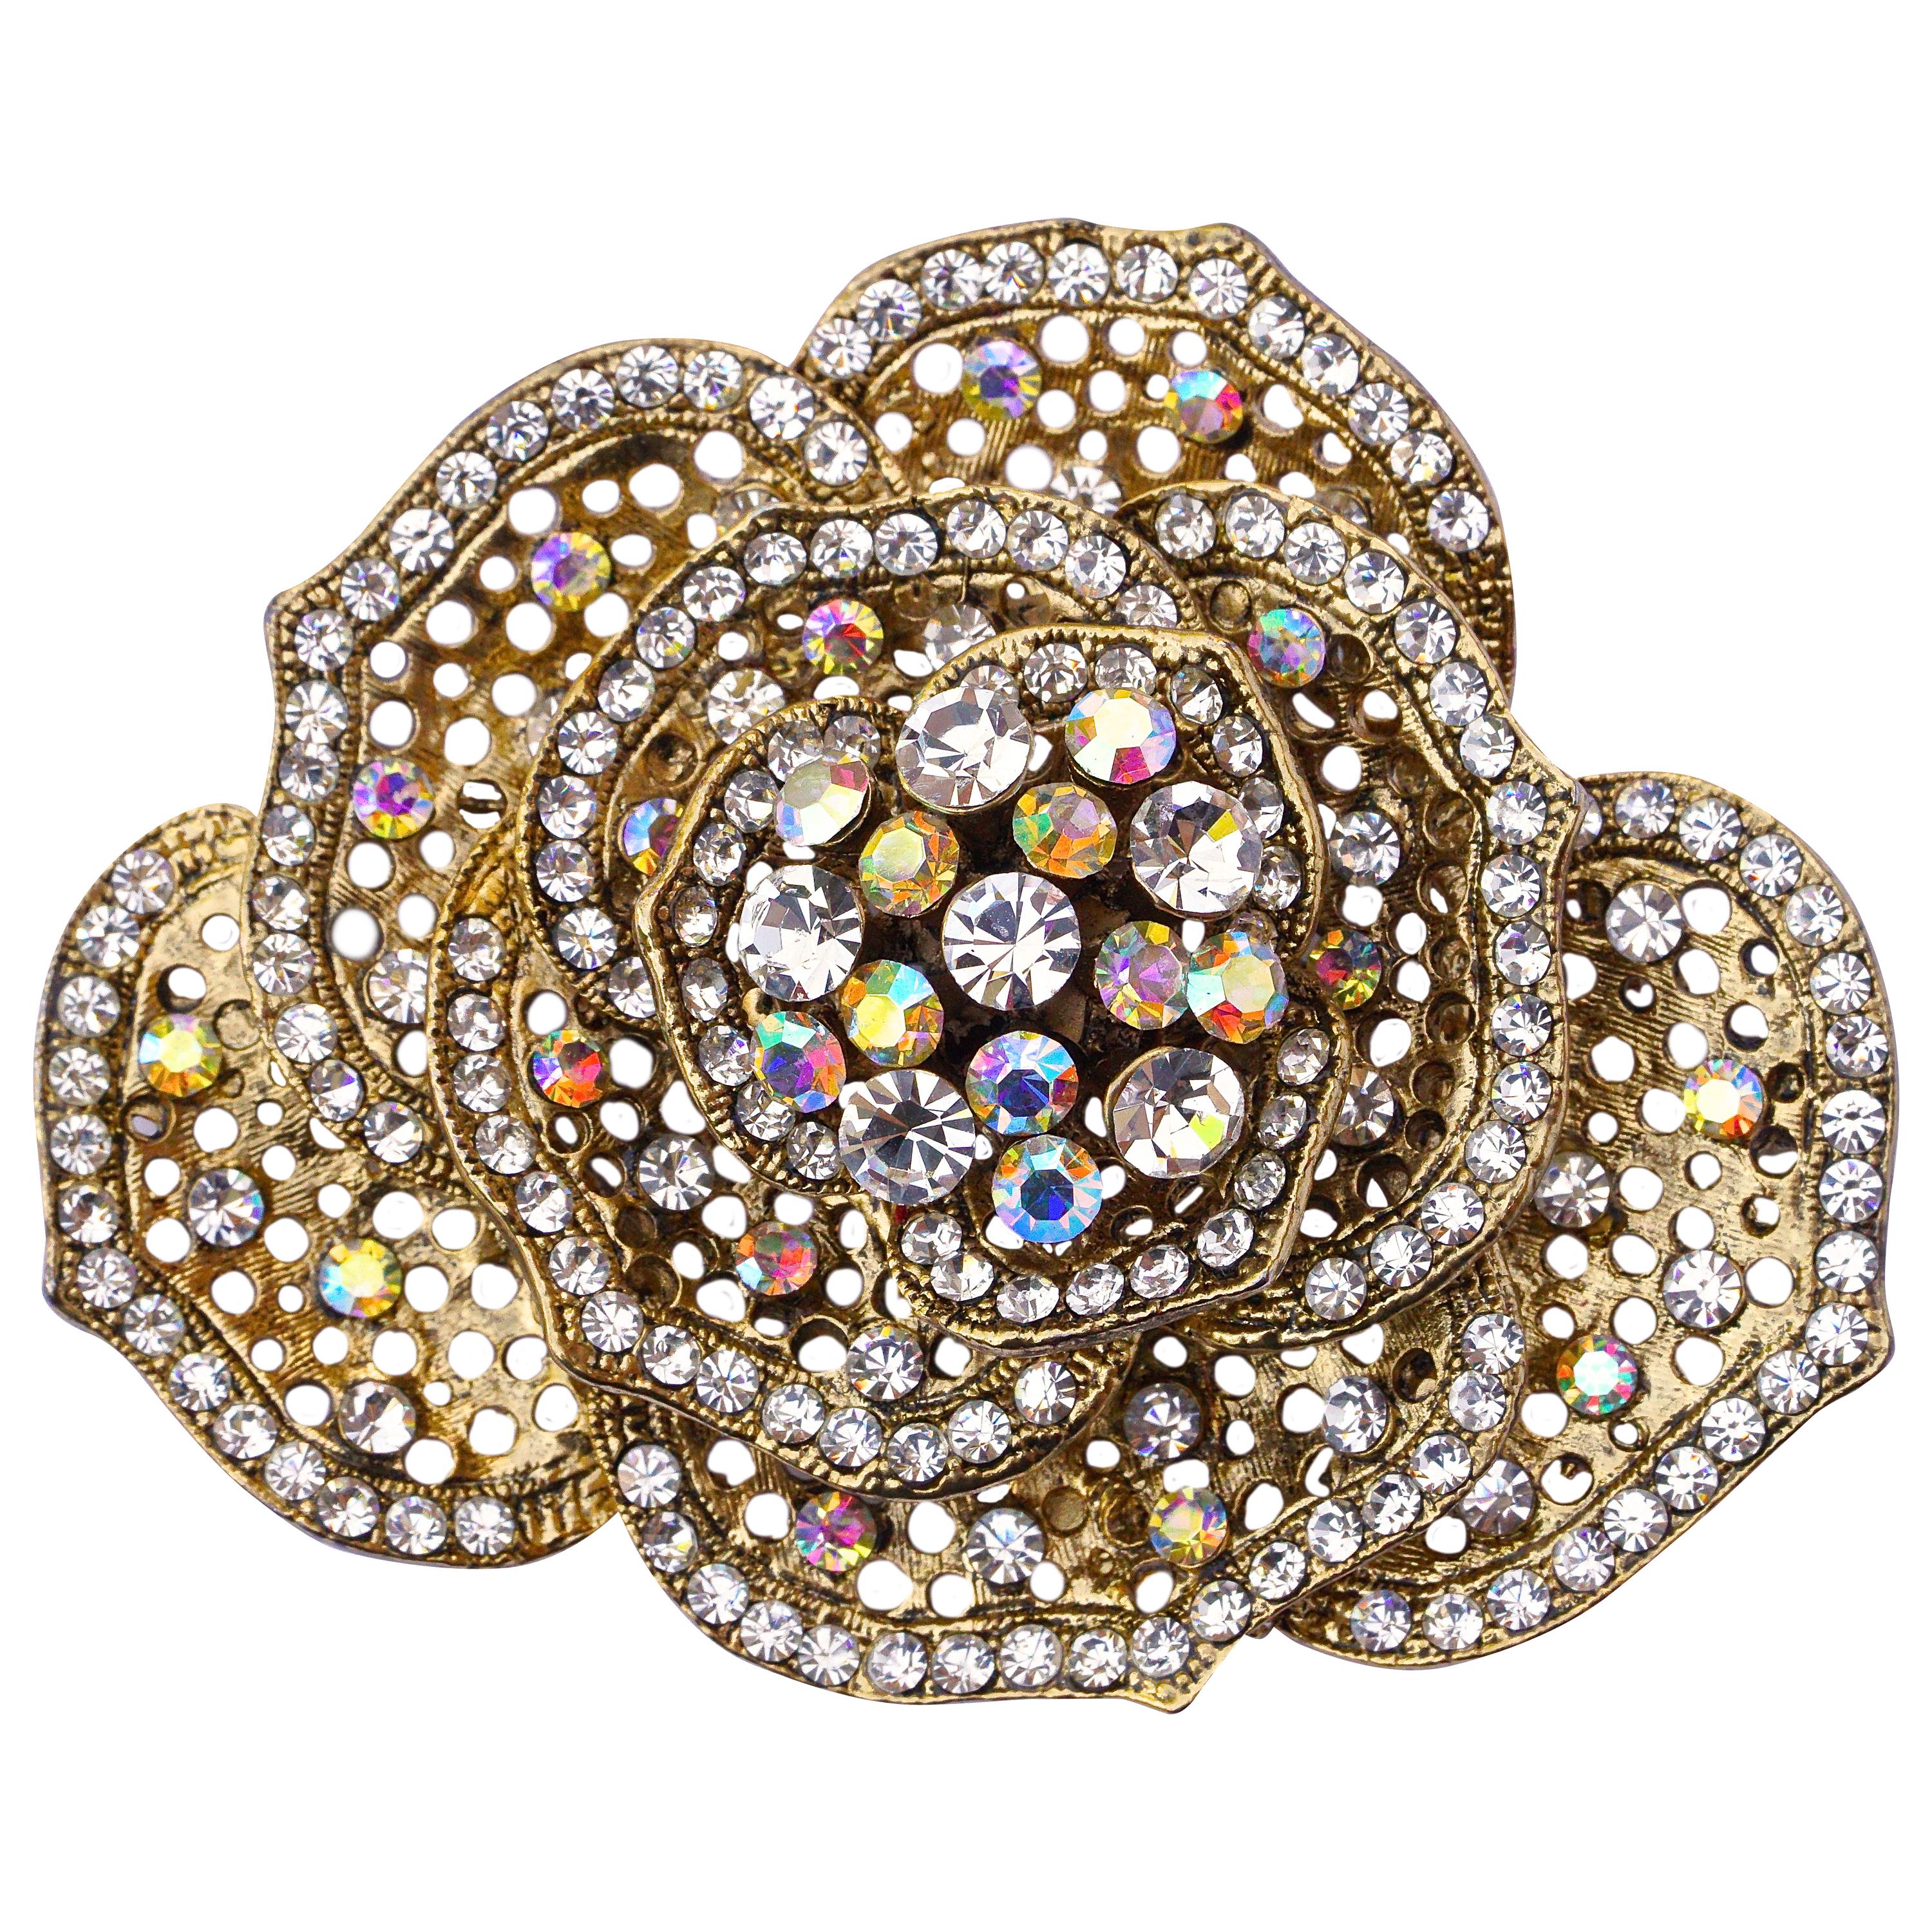 Butler & Wilson Gold Plated Flower Brooch with Clear & Aurora Borealis Crystals